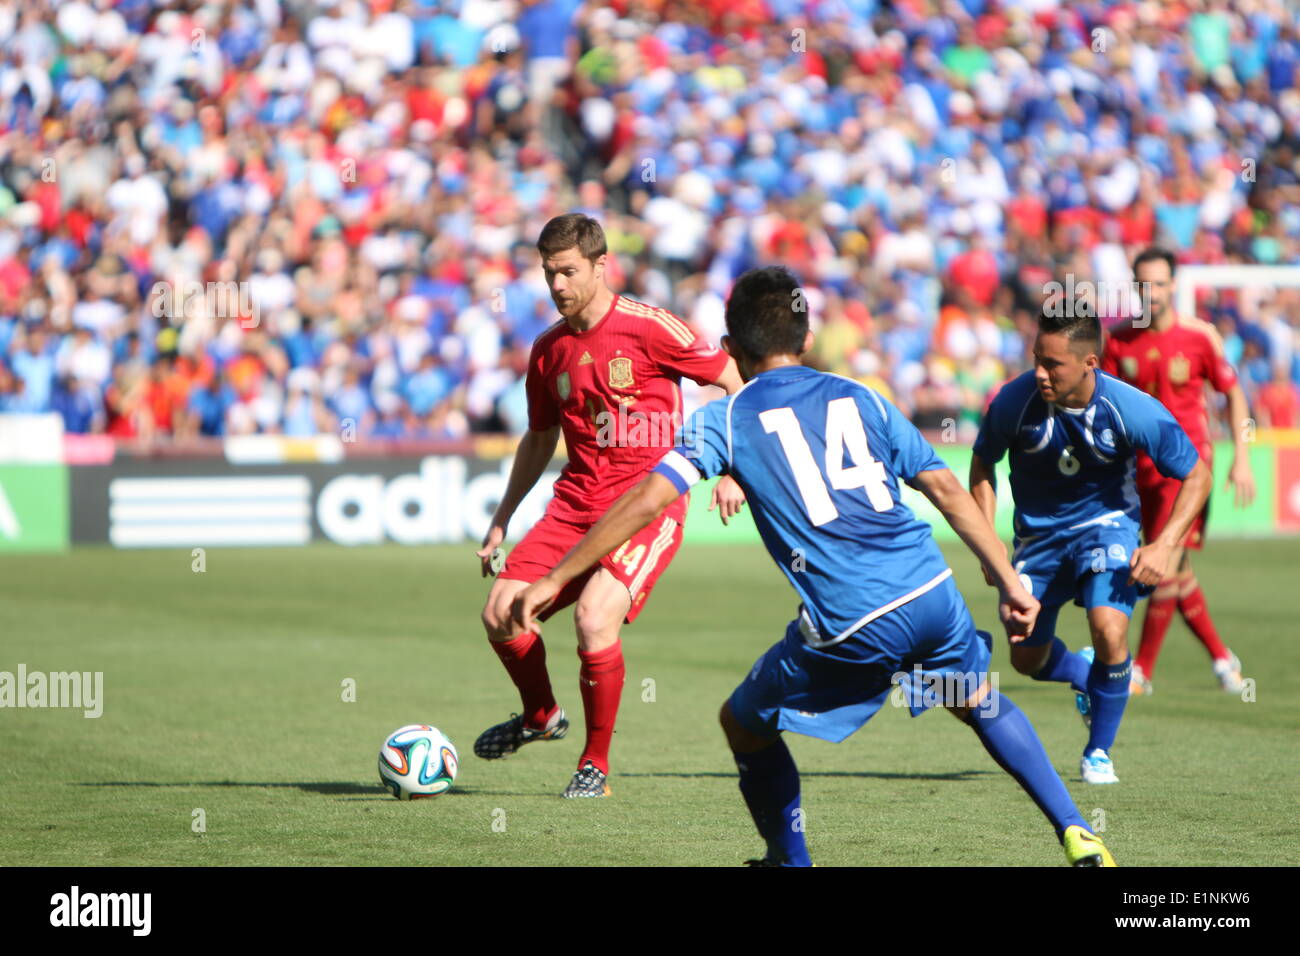 Washington, D.C, USA. 07th June, 2014. World Cup Soccer Warm up between Spain and El Salvador. Spain win 2-0, Goals by Spain # 7 David Villa. Spain's #14 Xabi Alonso sets to pass the ball to #15 Ramos. Credit:  Khamp Sykhammountry/Alamy Live News Stock Photo